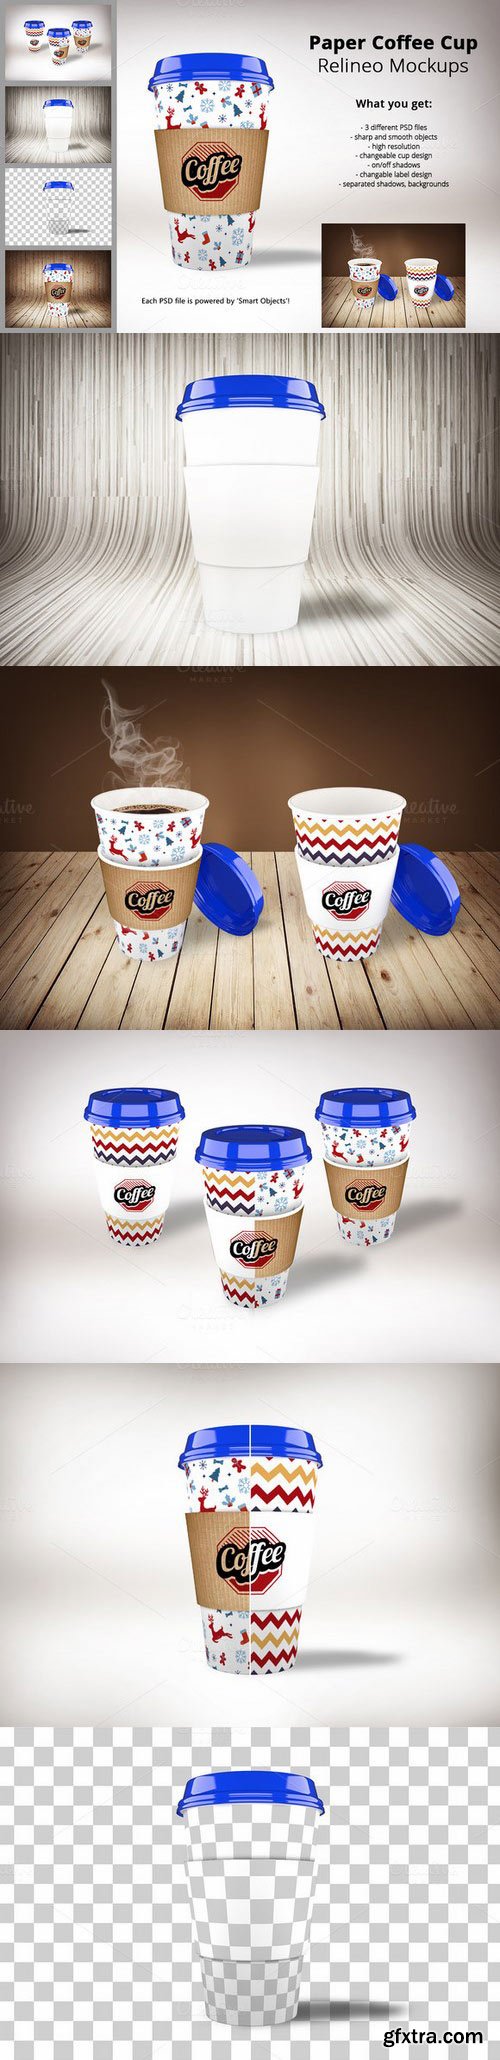 CM - Relineo Paper Coffee Cup Mockup Pack 459528